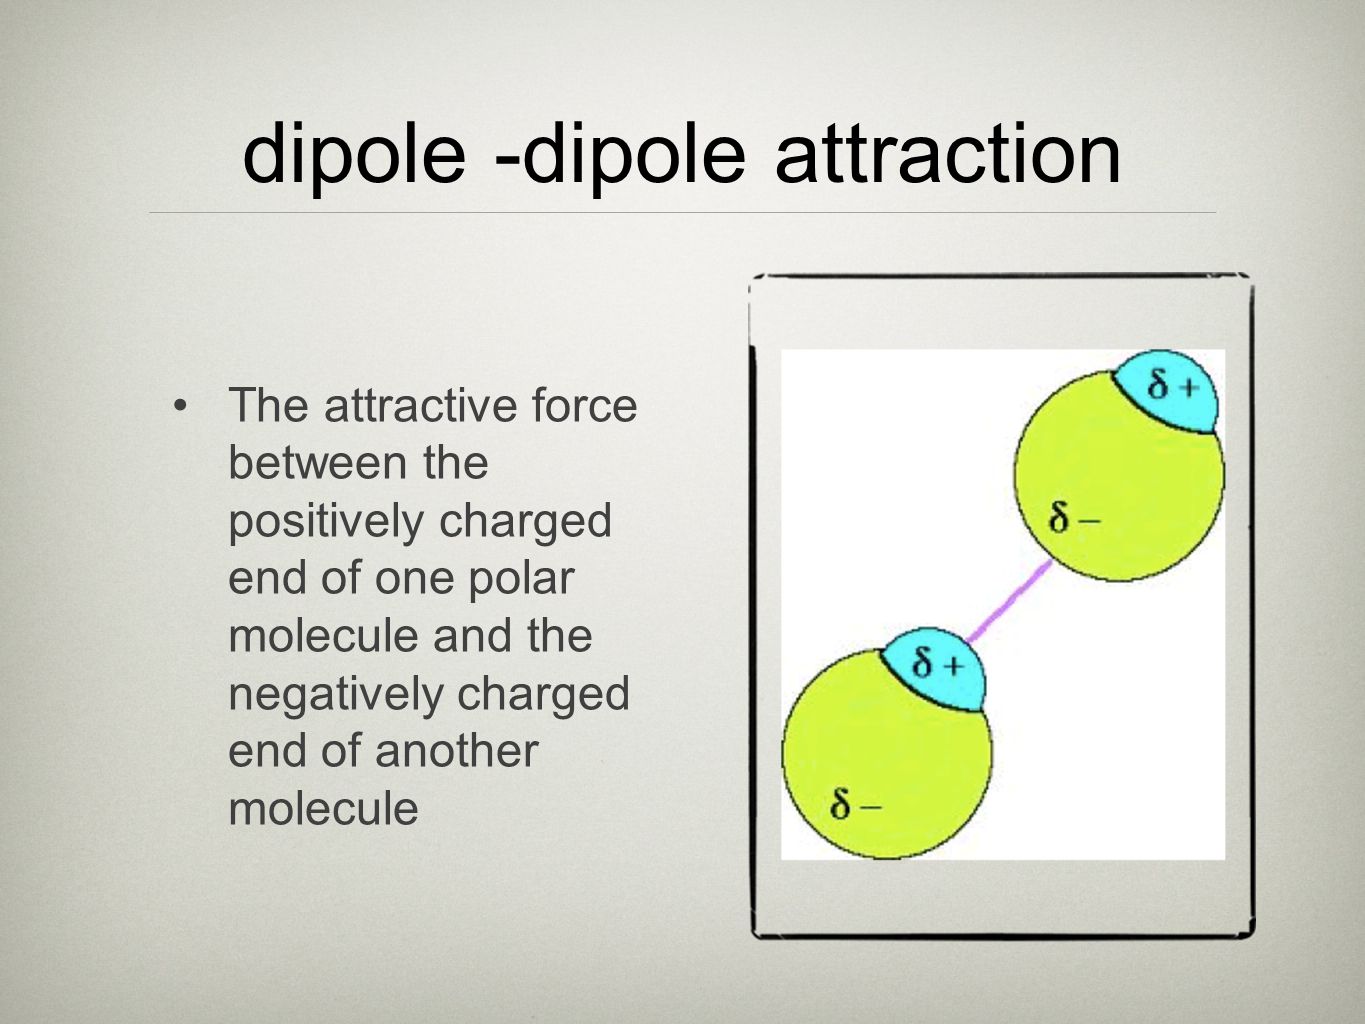 dipole -dipole attraction The attractive force between the positively charged end of one polar molecule and the negatively charged end of another molecule